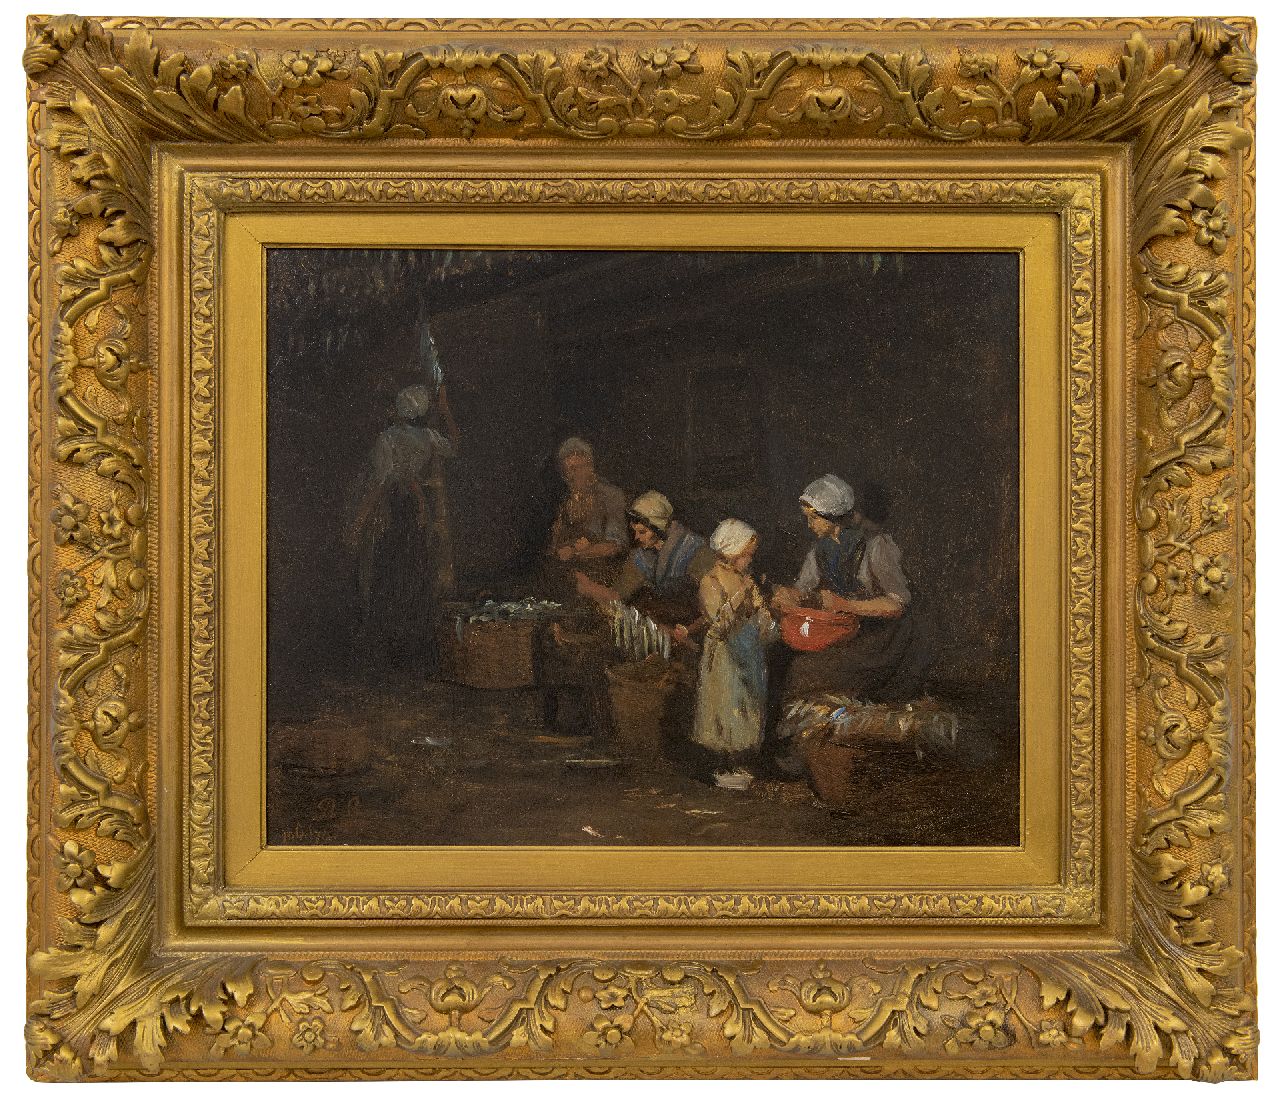 Sadée P.L.J.F.  | Philip Lodewijk Jacob Frederik Sadée, Herring smokehouse, oil on paper laid down on board 35.0 x 42.5 cm, signed l.l. with initials and dated 10 Oct 74